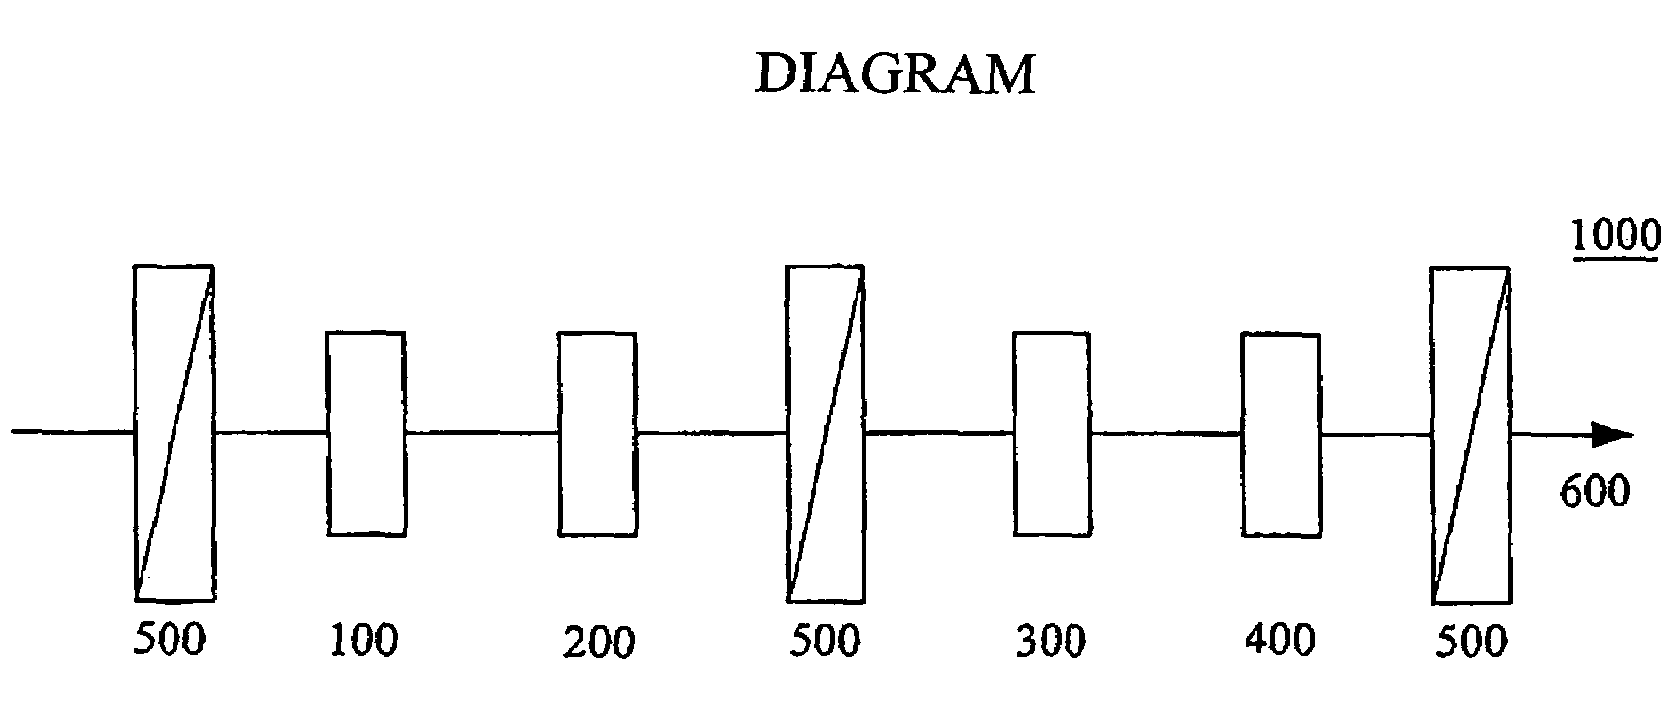 Tunable terahertz wavelength selector device using magnetically controlled birefringence of liquid crystals